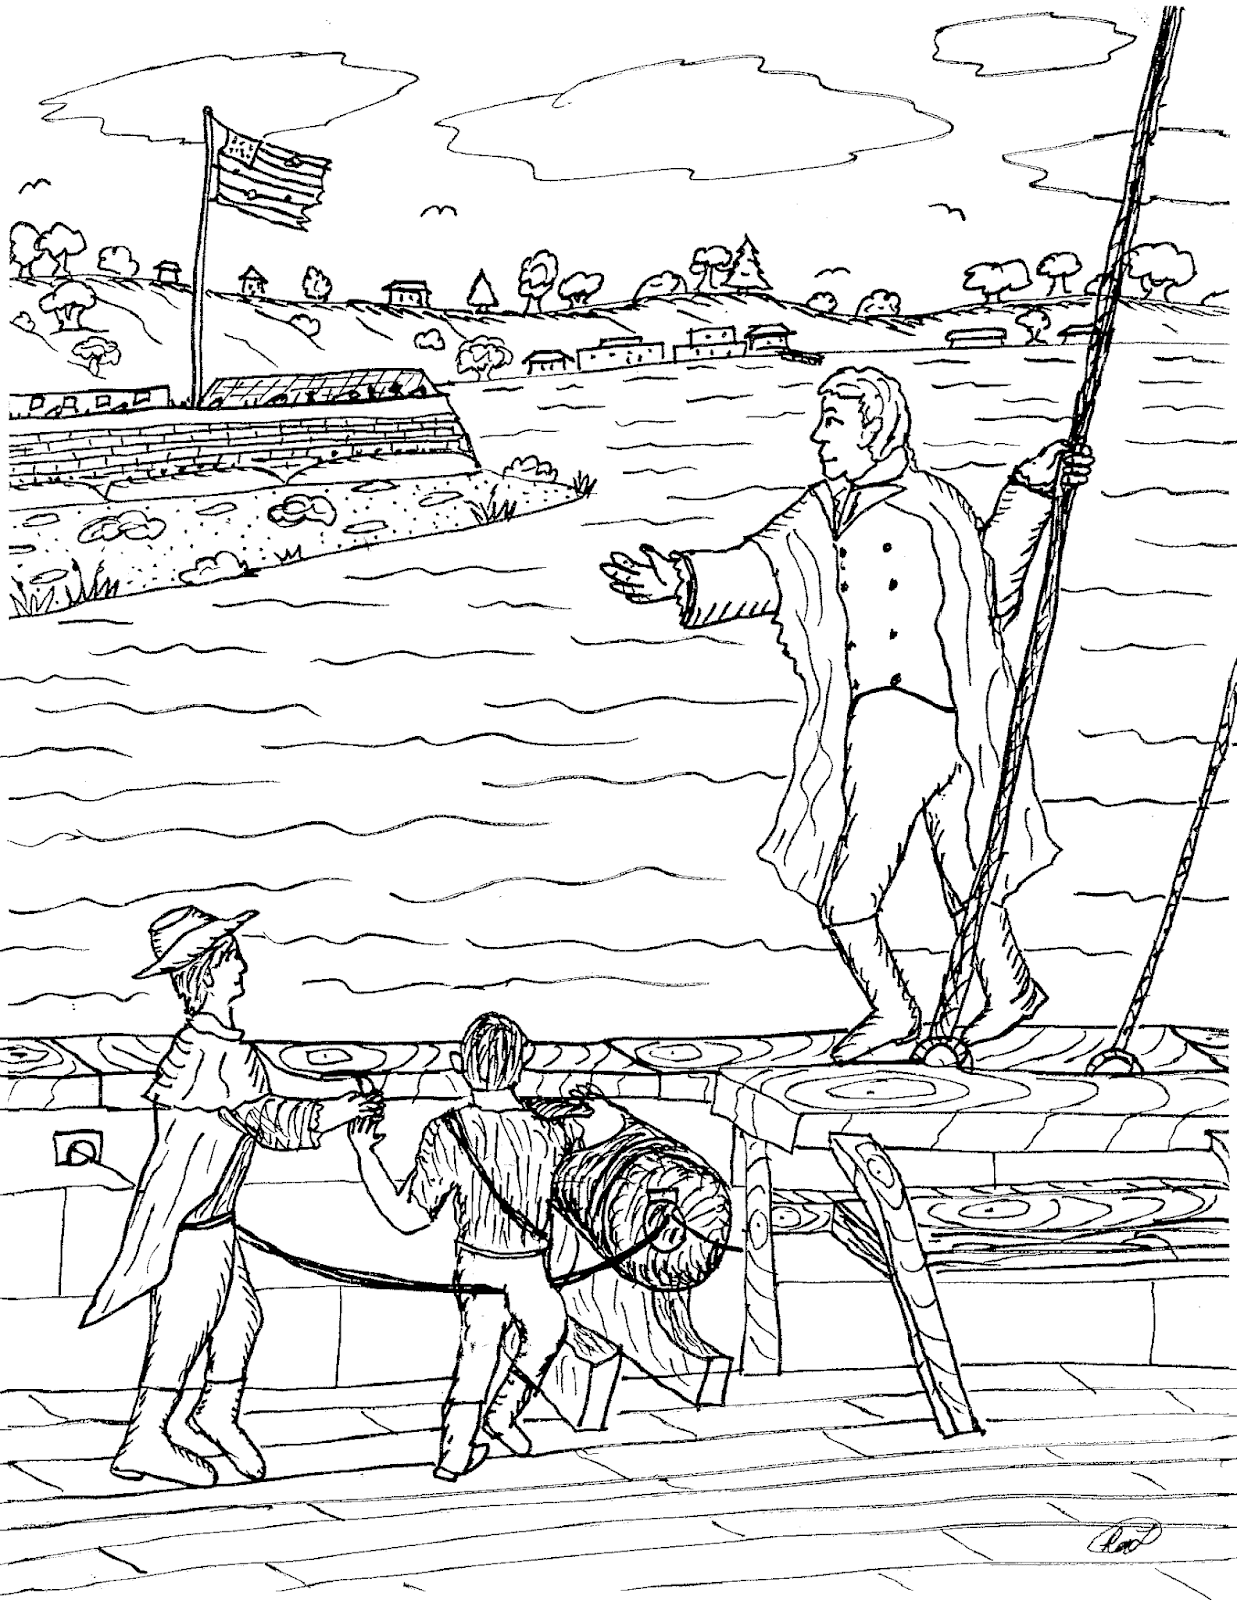 robin-s-great-coloring-pages-battle-of-baltimore-fort-mchenry